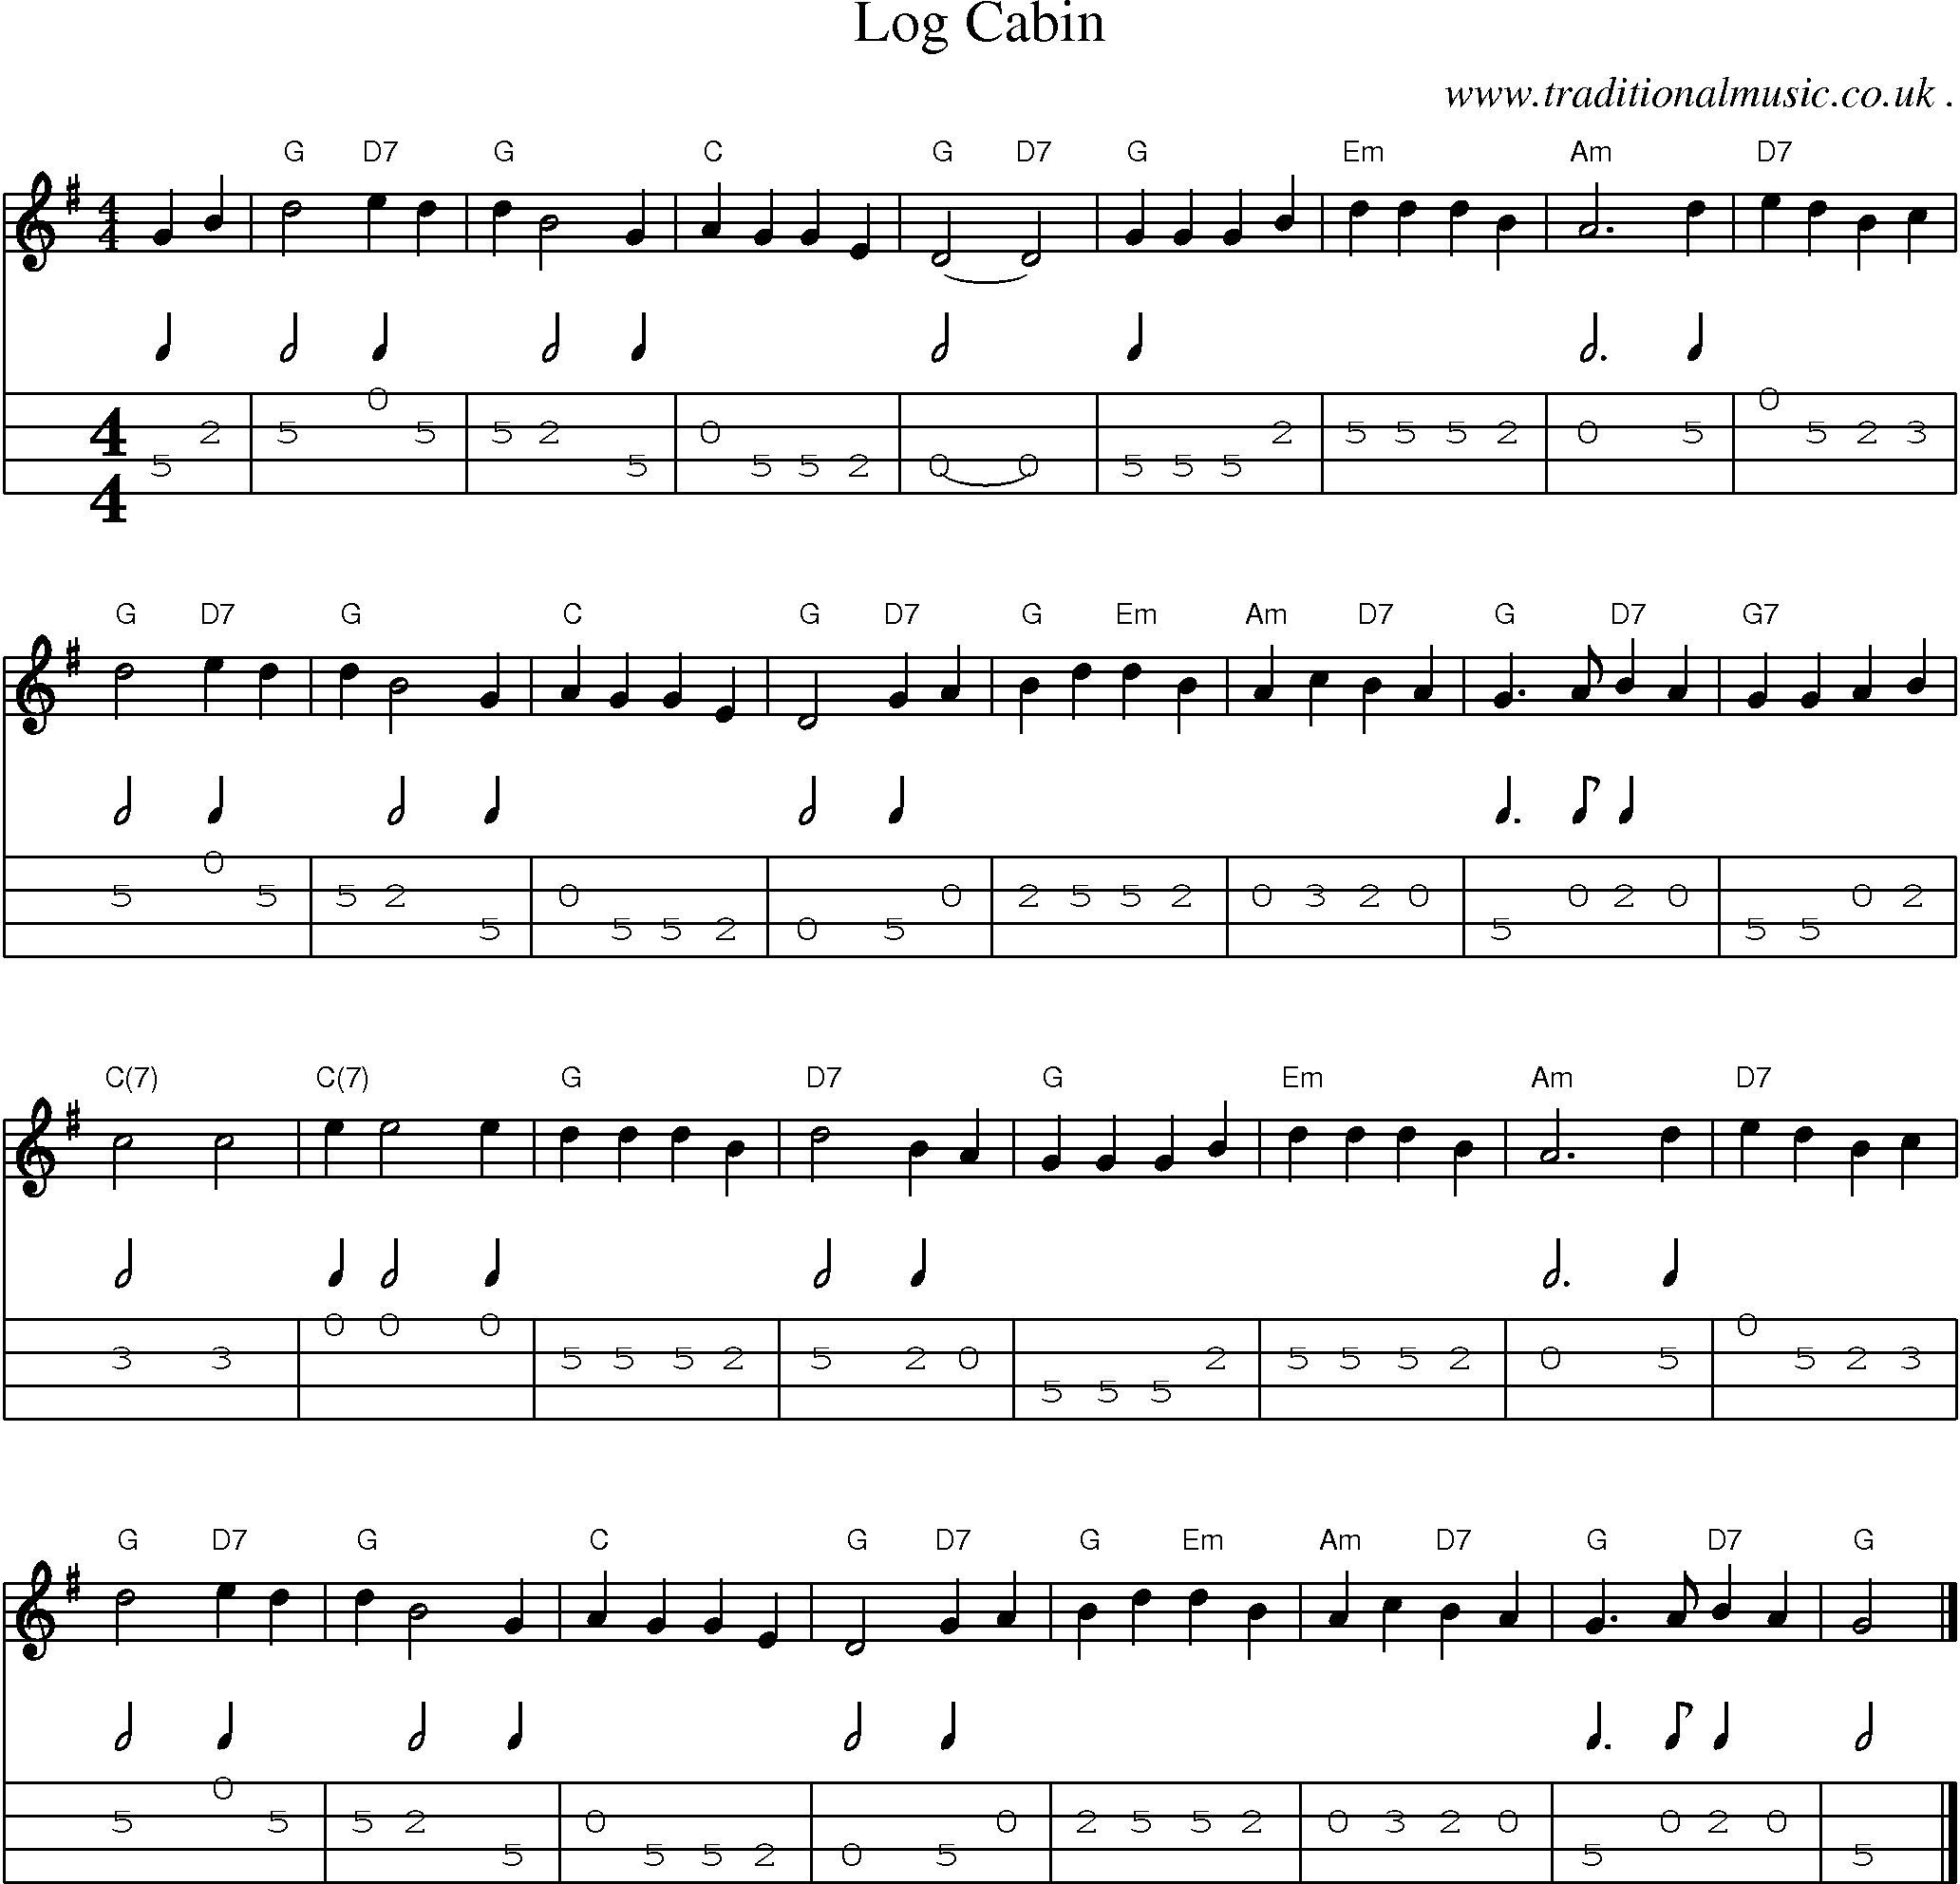 Music Score and Guitar Tabs for Log Cabin